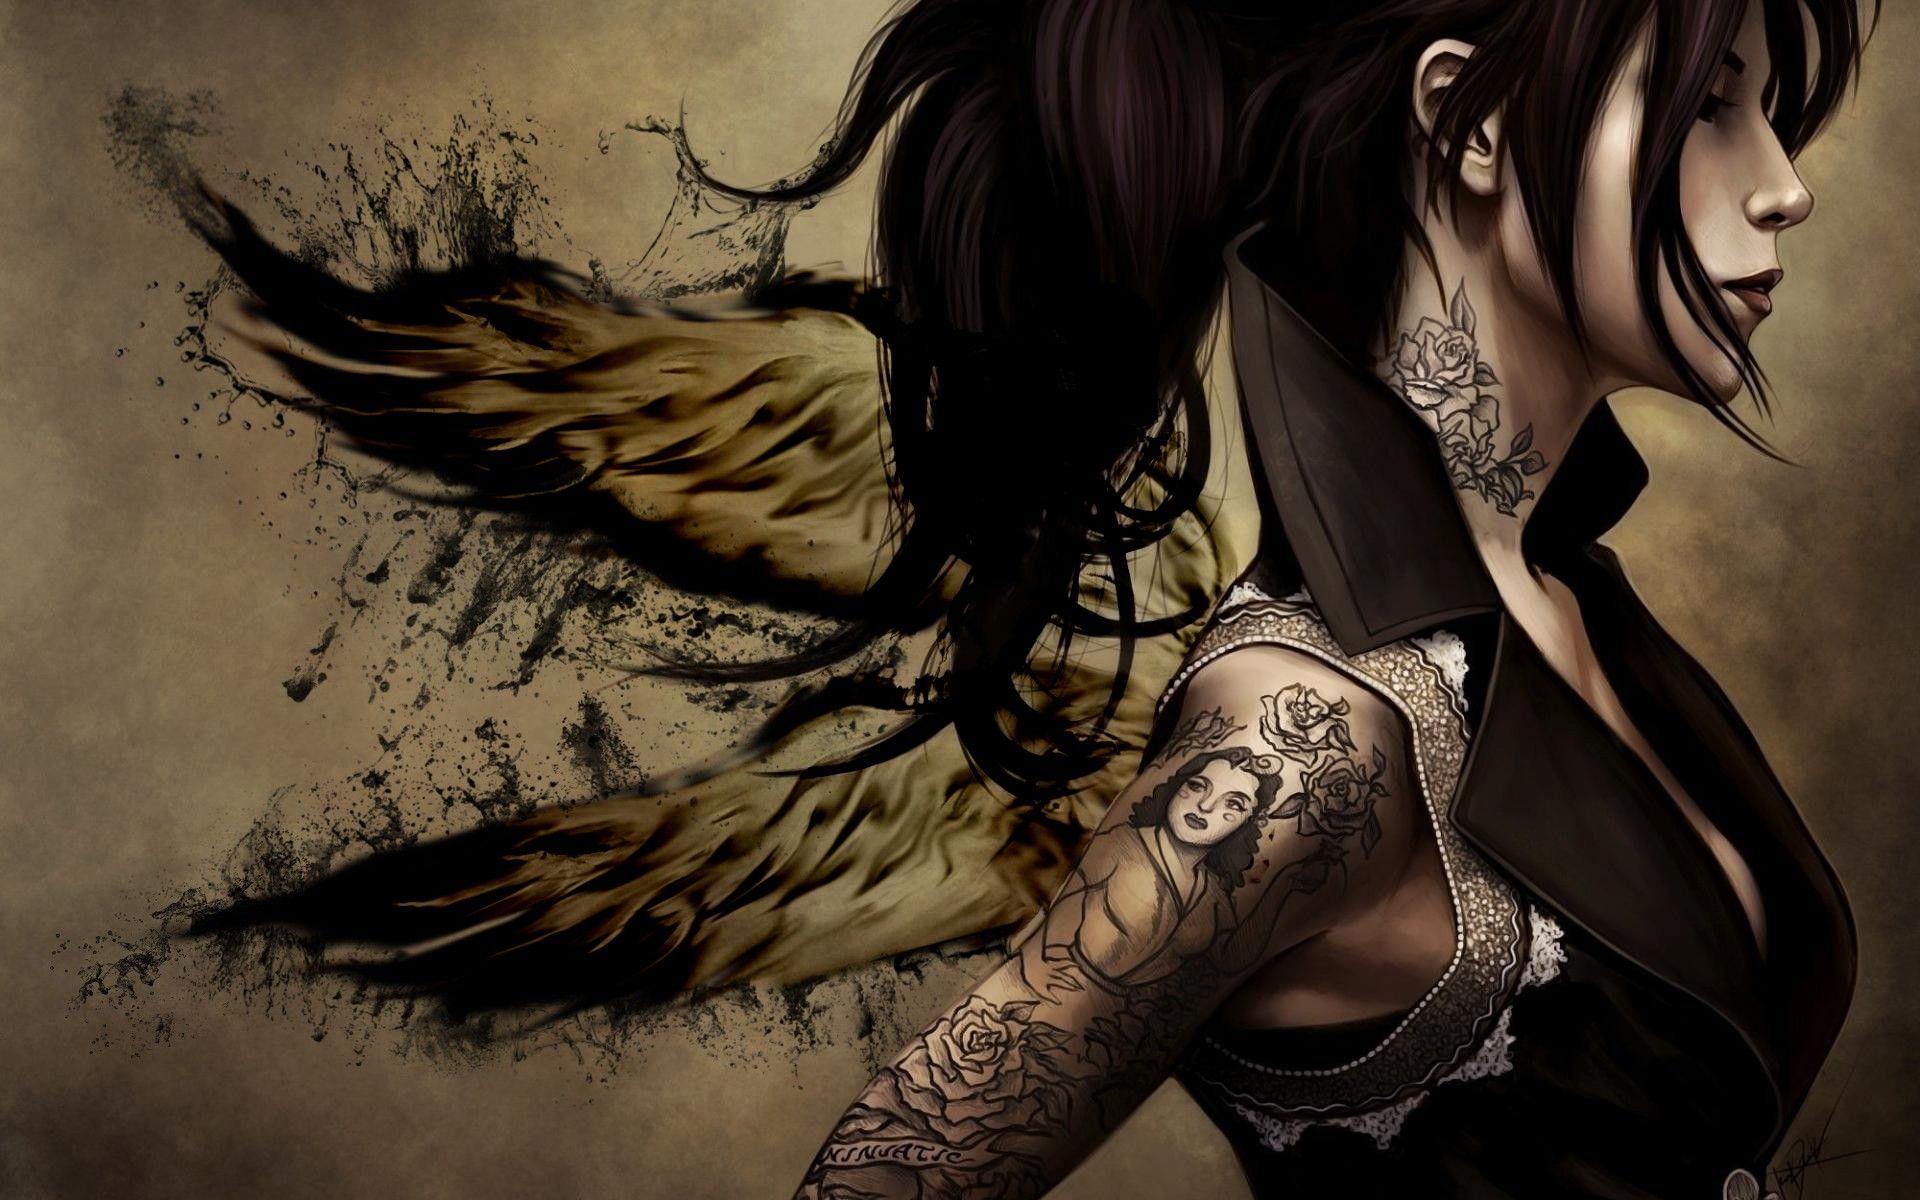 Download the Tattoo Wings Wallpaper, Tattoo Wings iPhone Wallpaper